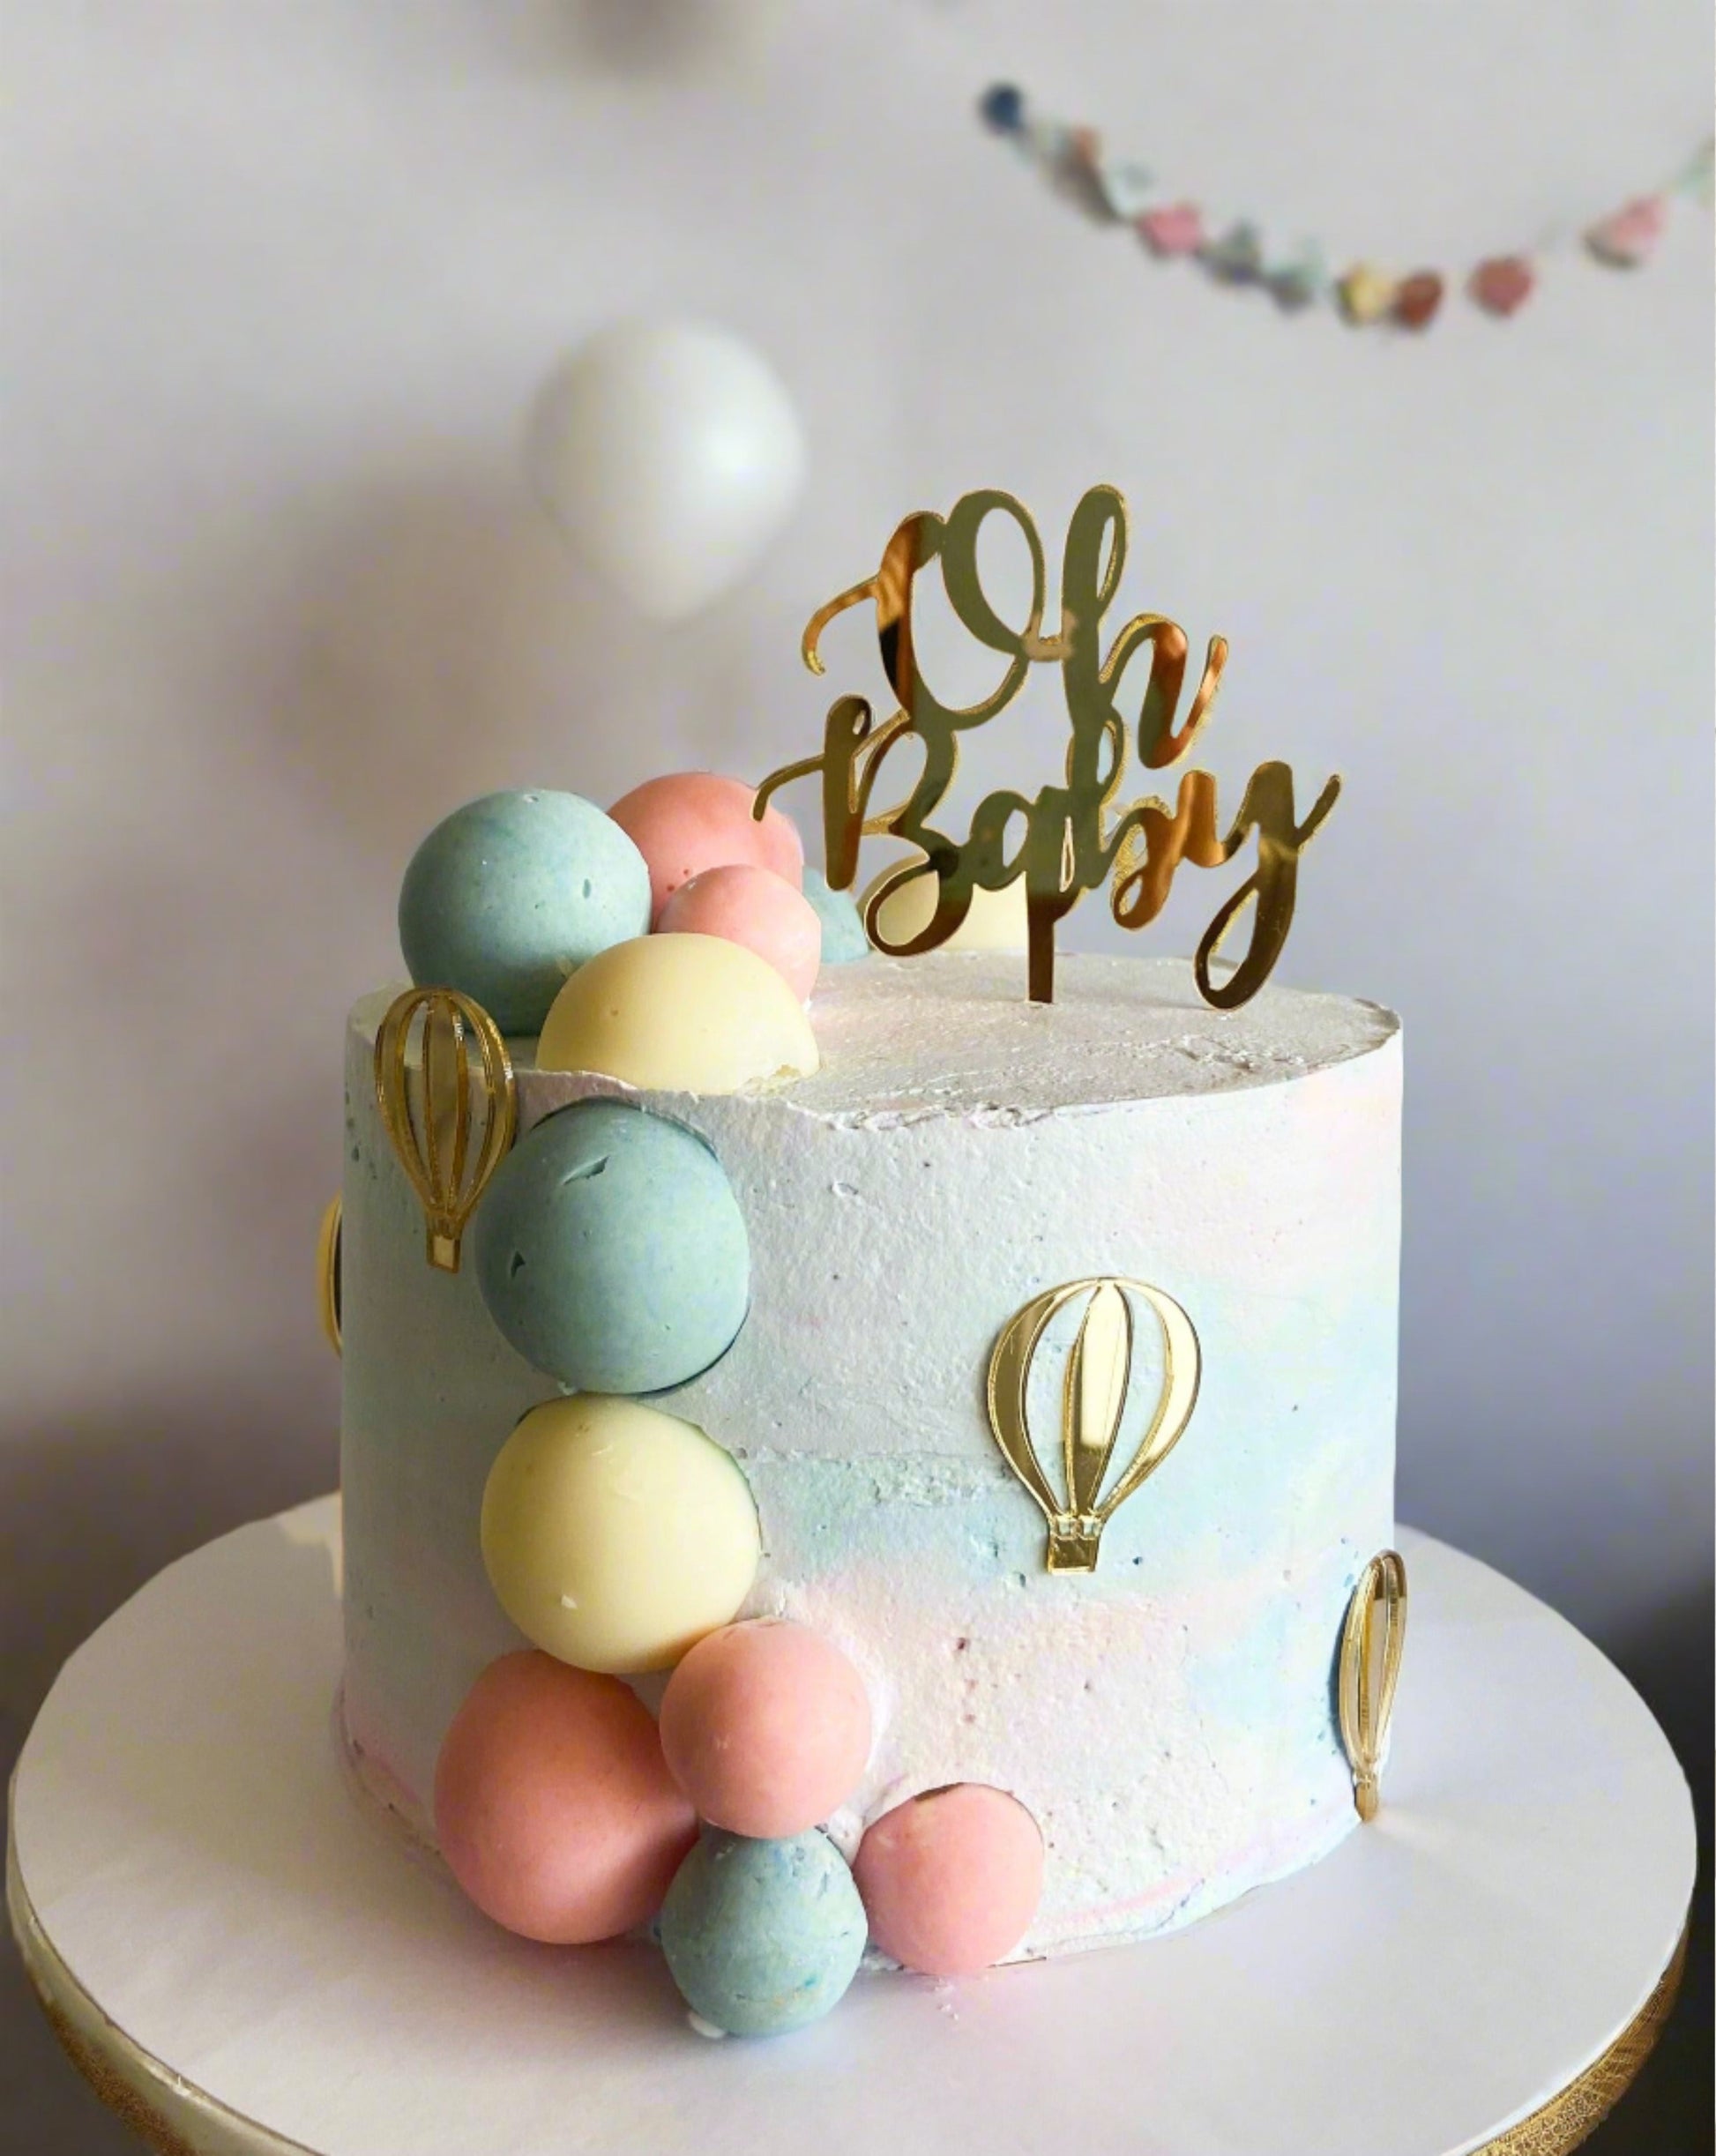 Baby Shower Maxi-Cake | Cake Delivery in Melbourne – Little Cupcakes